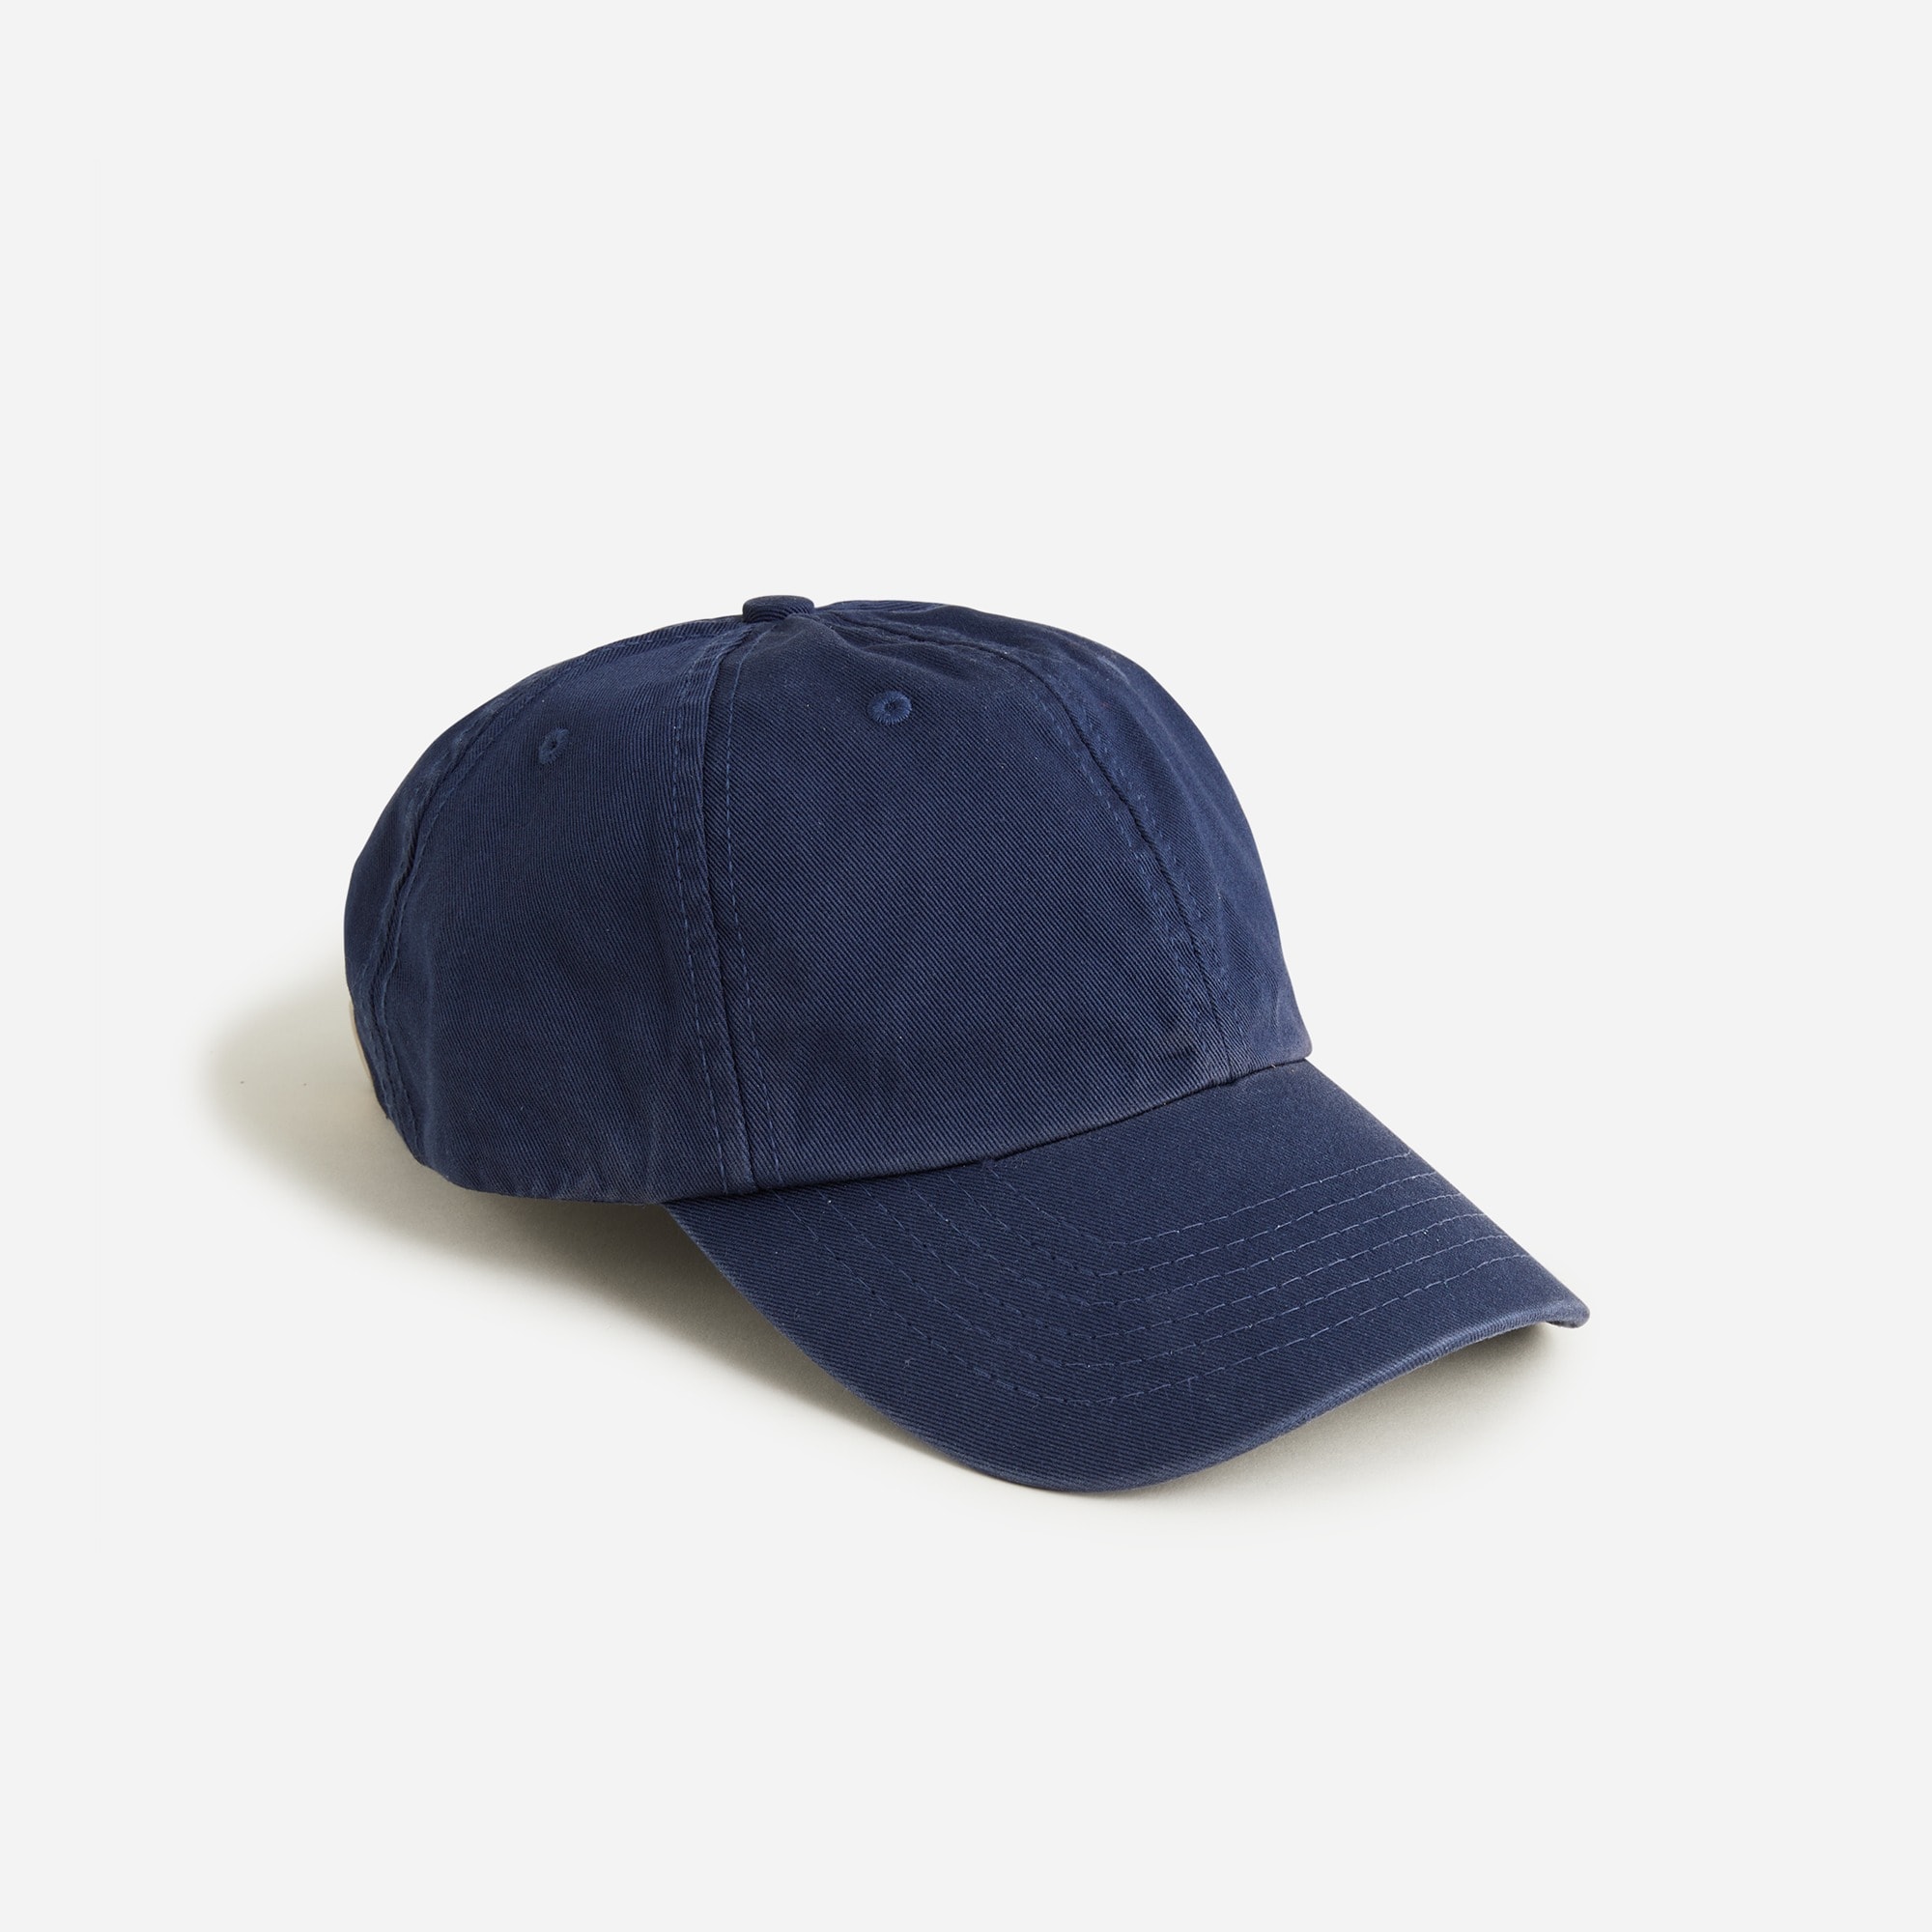 womens Made-in-the-USA garment-dyed twill baseball cap